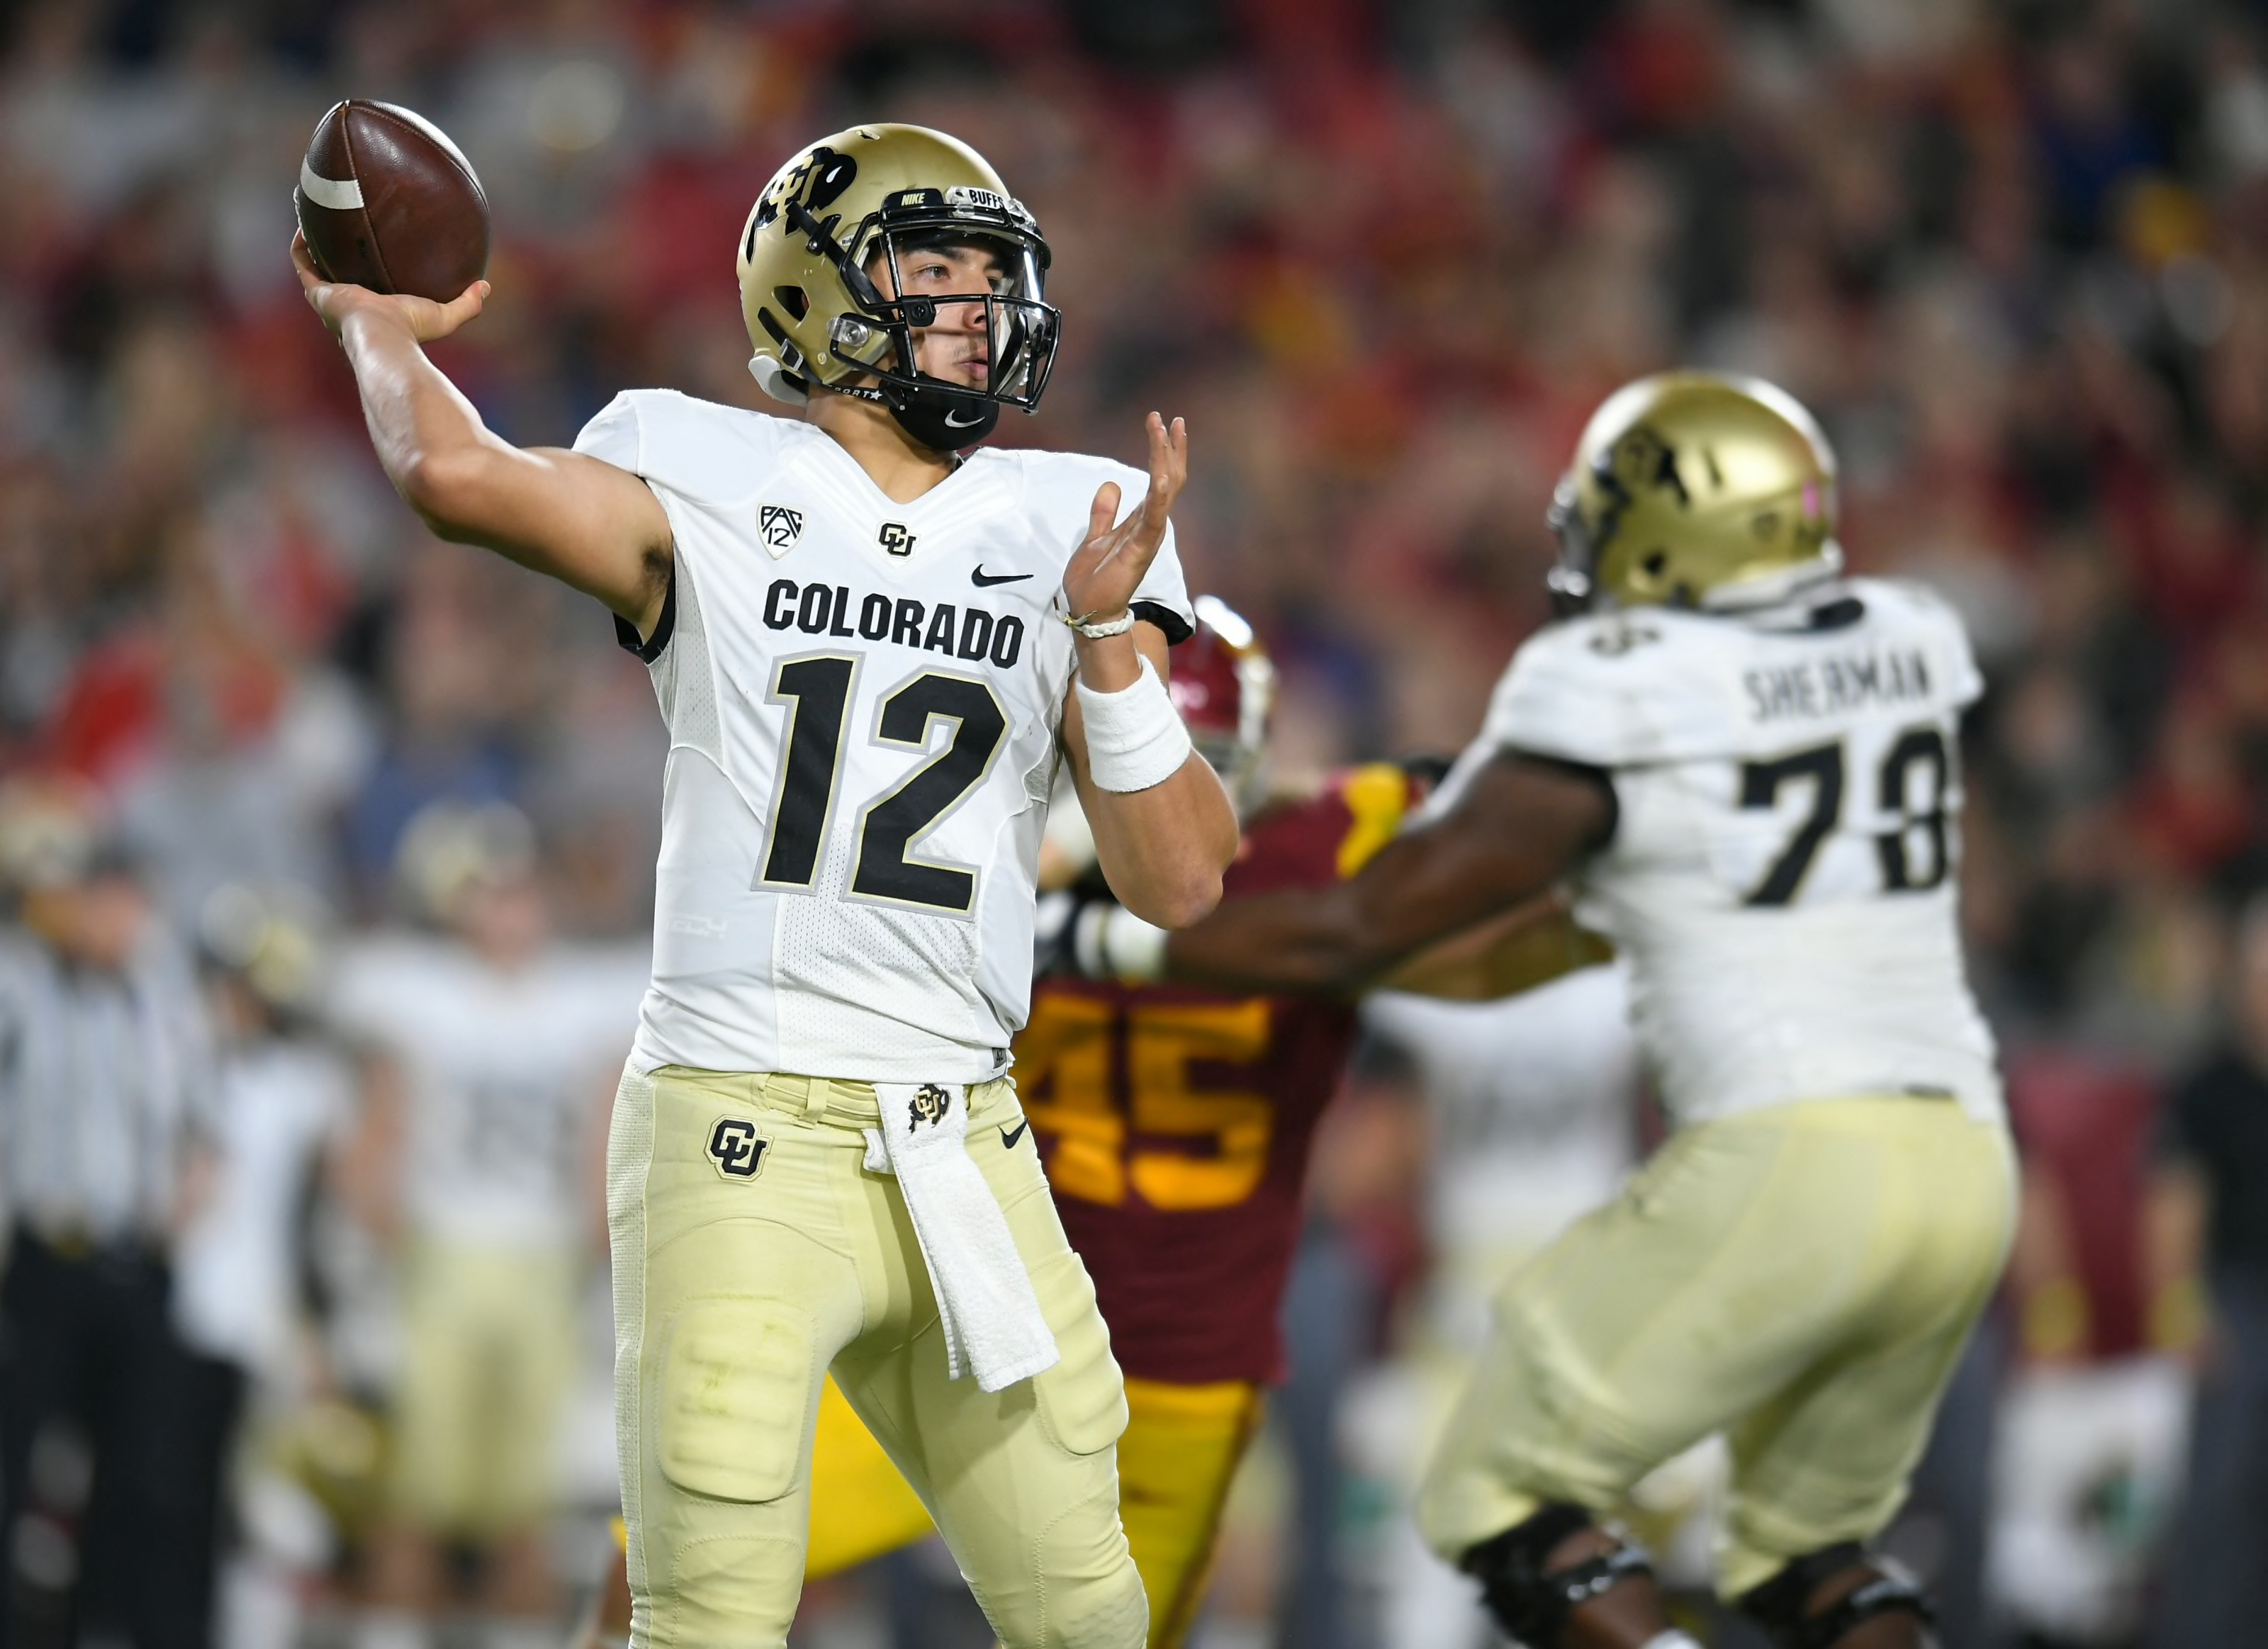 Rating the Three Colorado Football Stars After the USC Loss Page 2